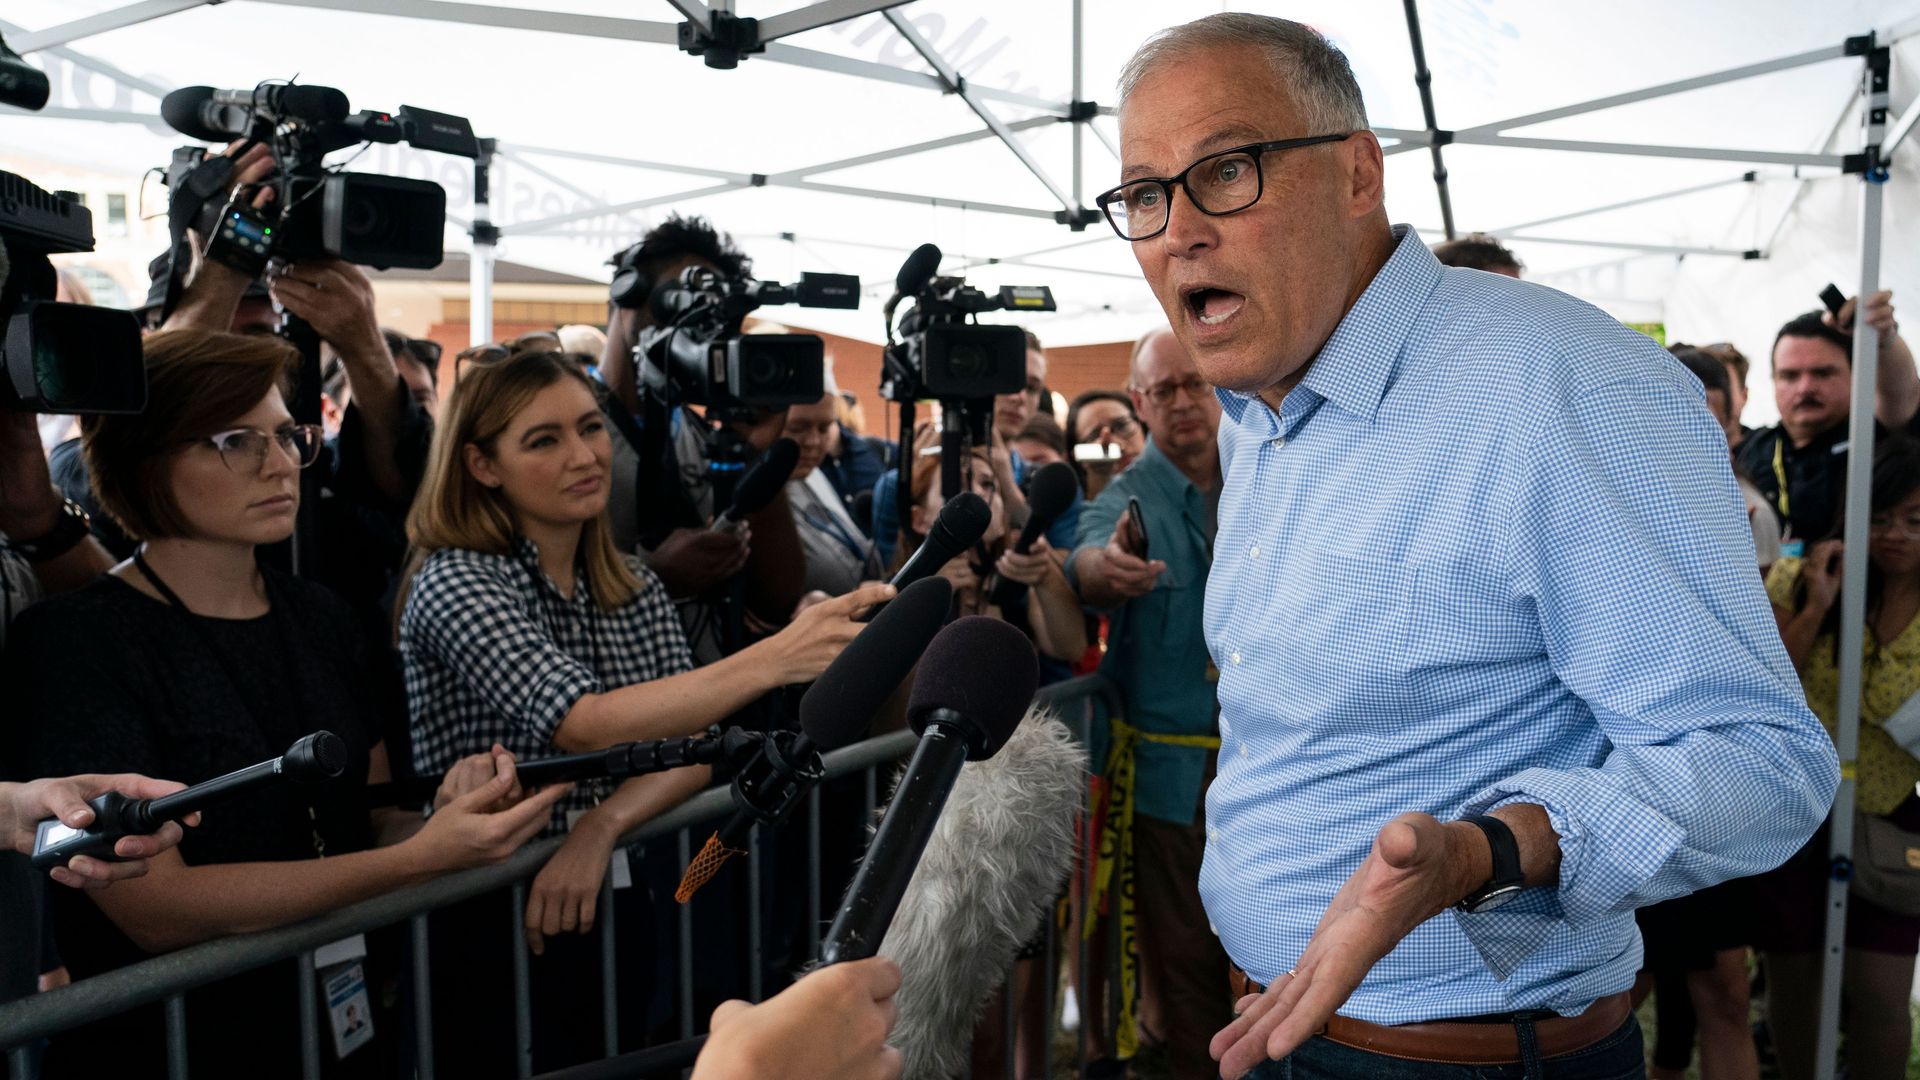  Democratic presidential candidate and Washington Governor Jay Inslee speaks with reporters at the Iowa State Fair August 10, 2019 in Des Moines, Iowa.